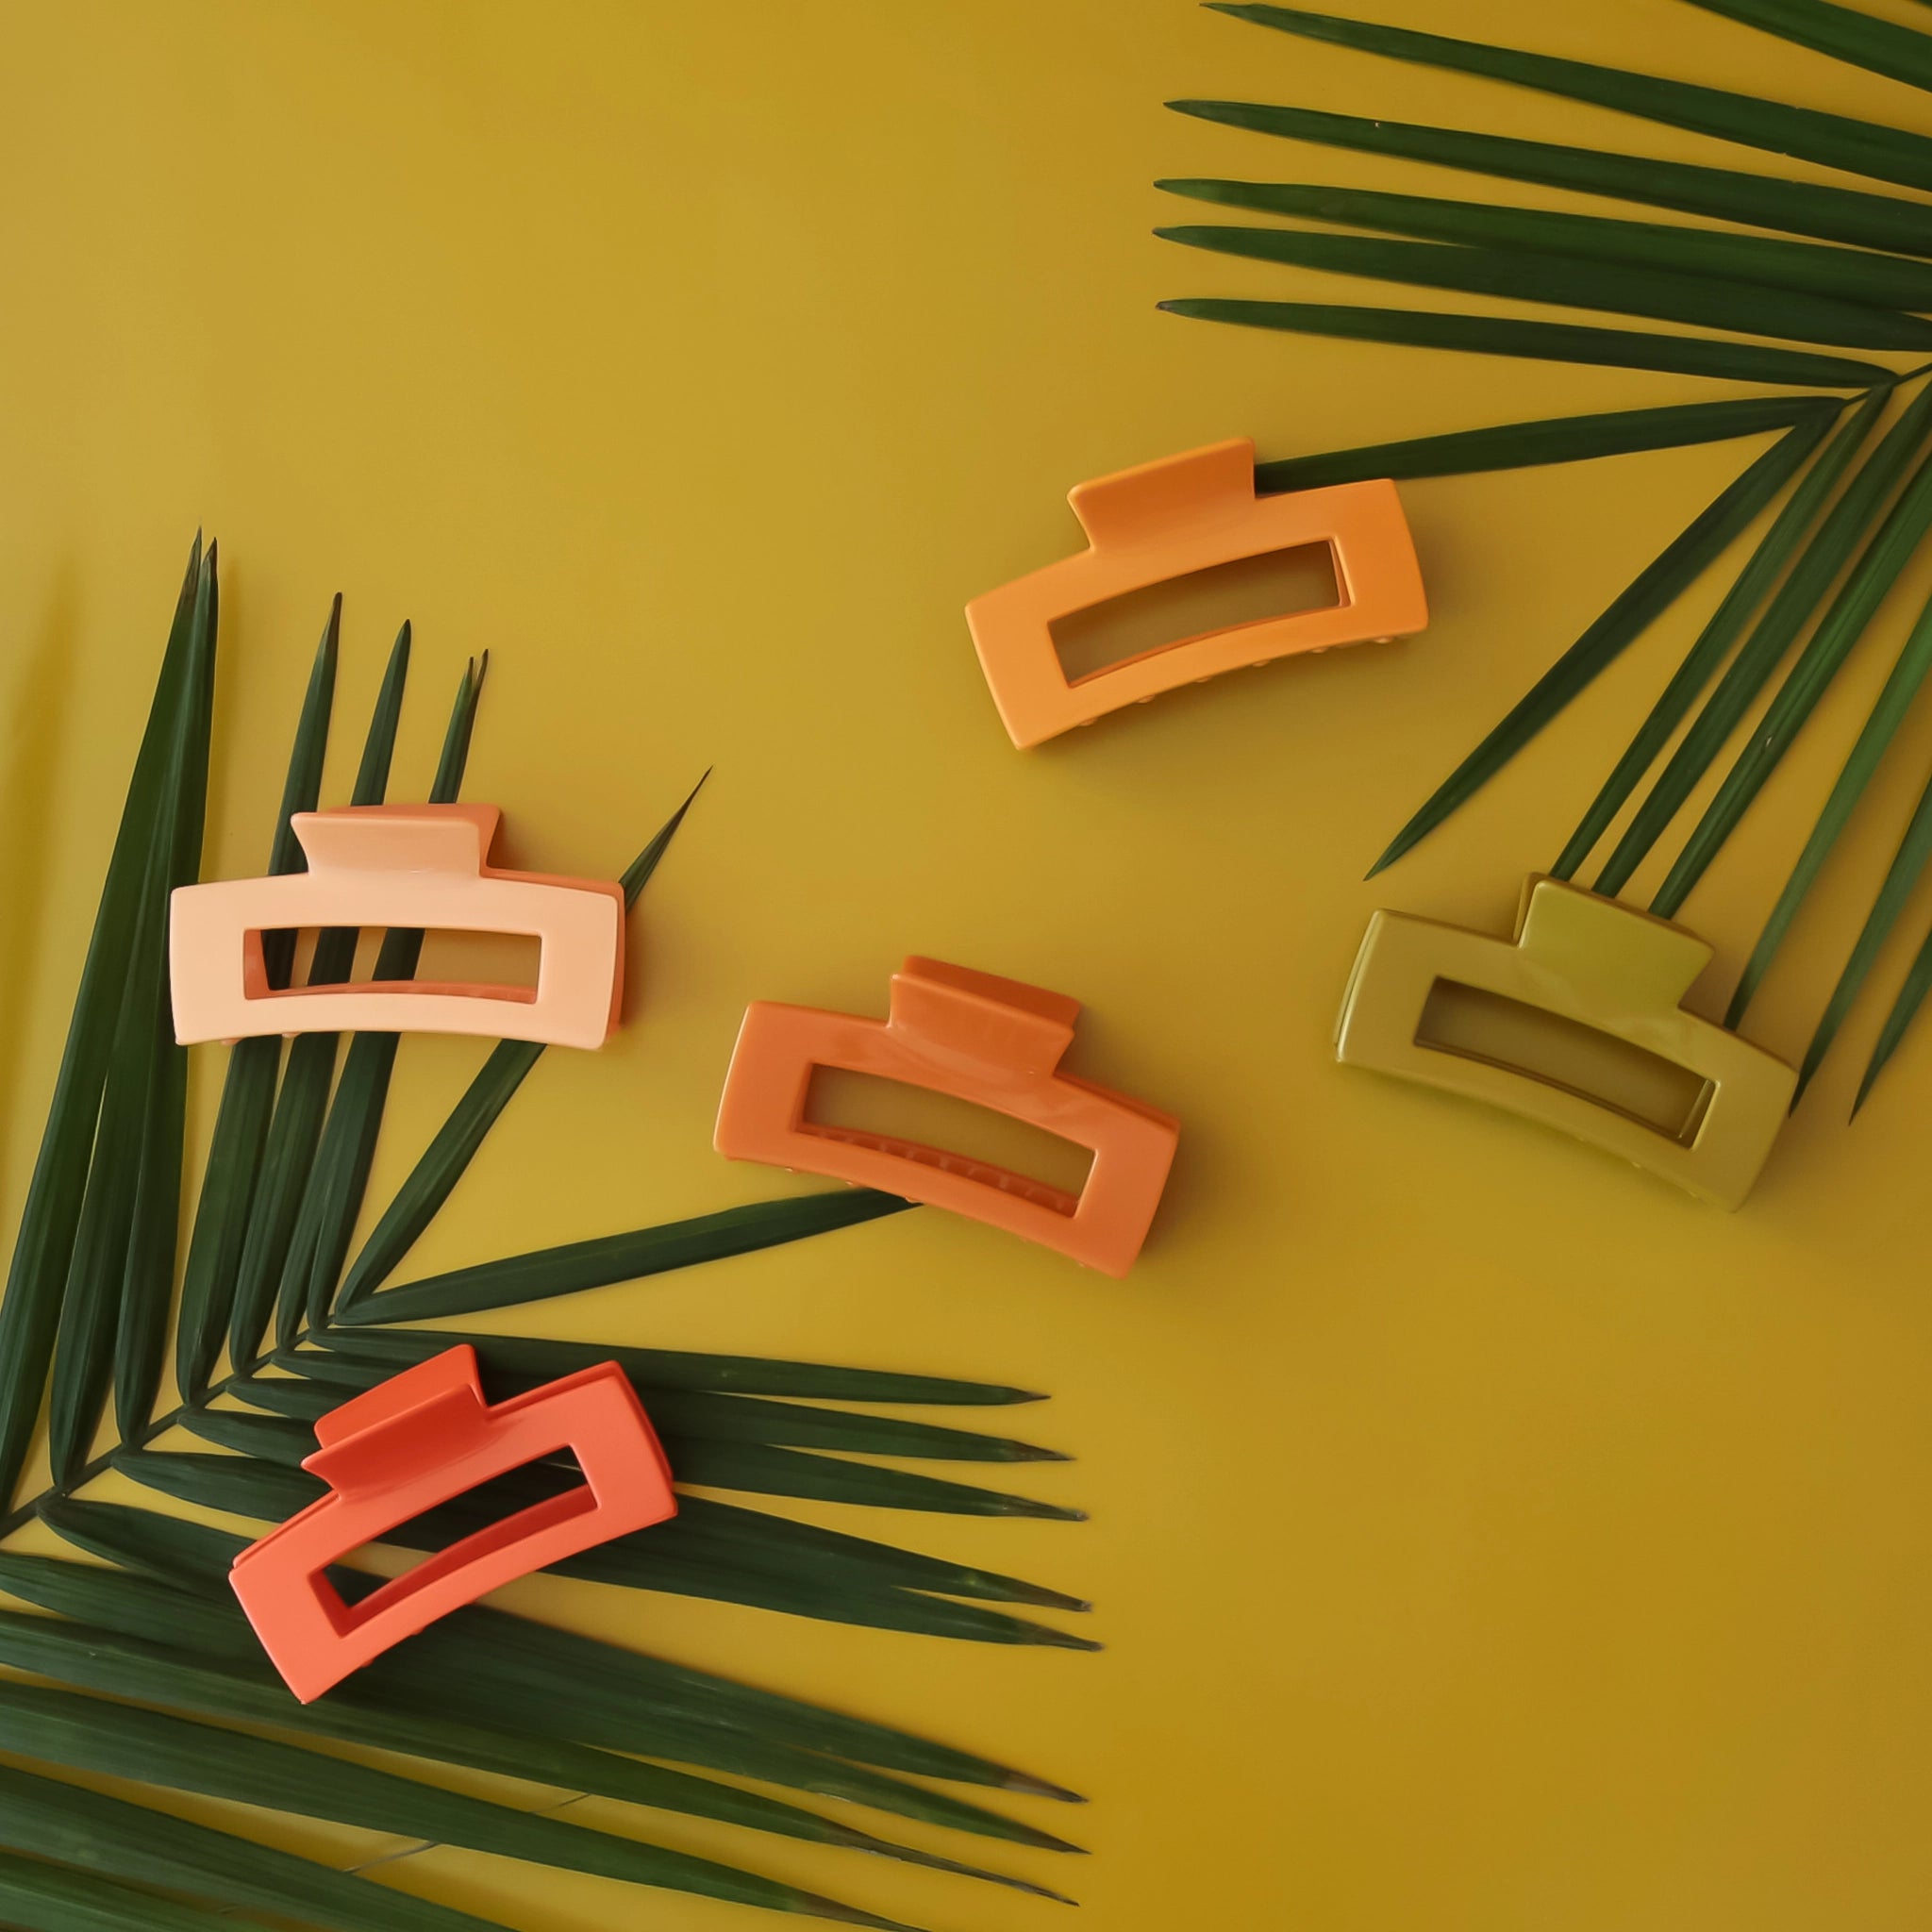 On a green background is a variety of different colored hair clips that have a rectangular design. The colors included are, red, dark orange, yellow/orange, light orange, and olive green. 